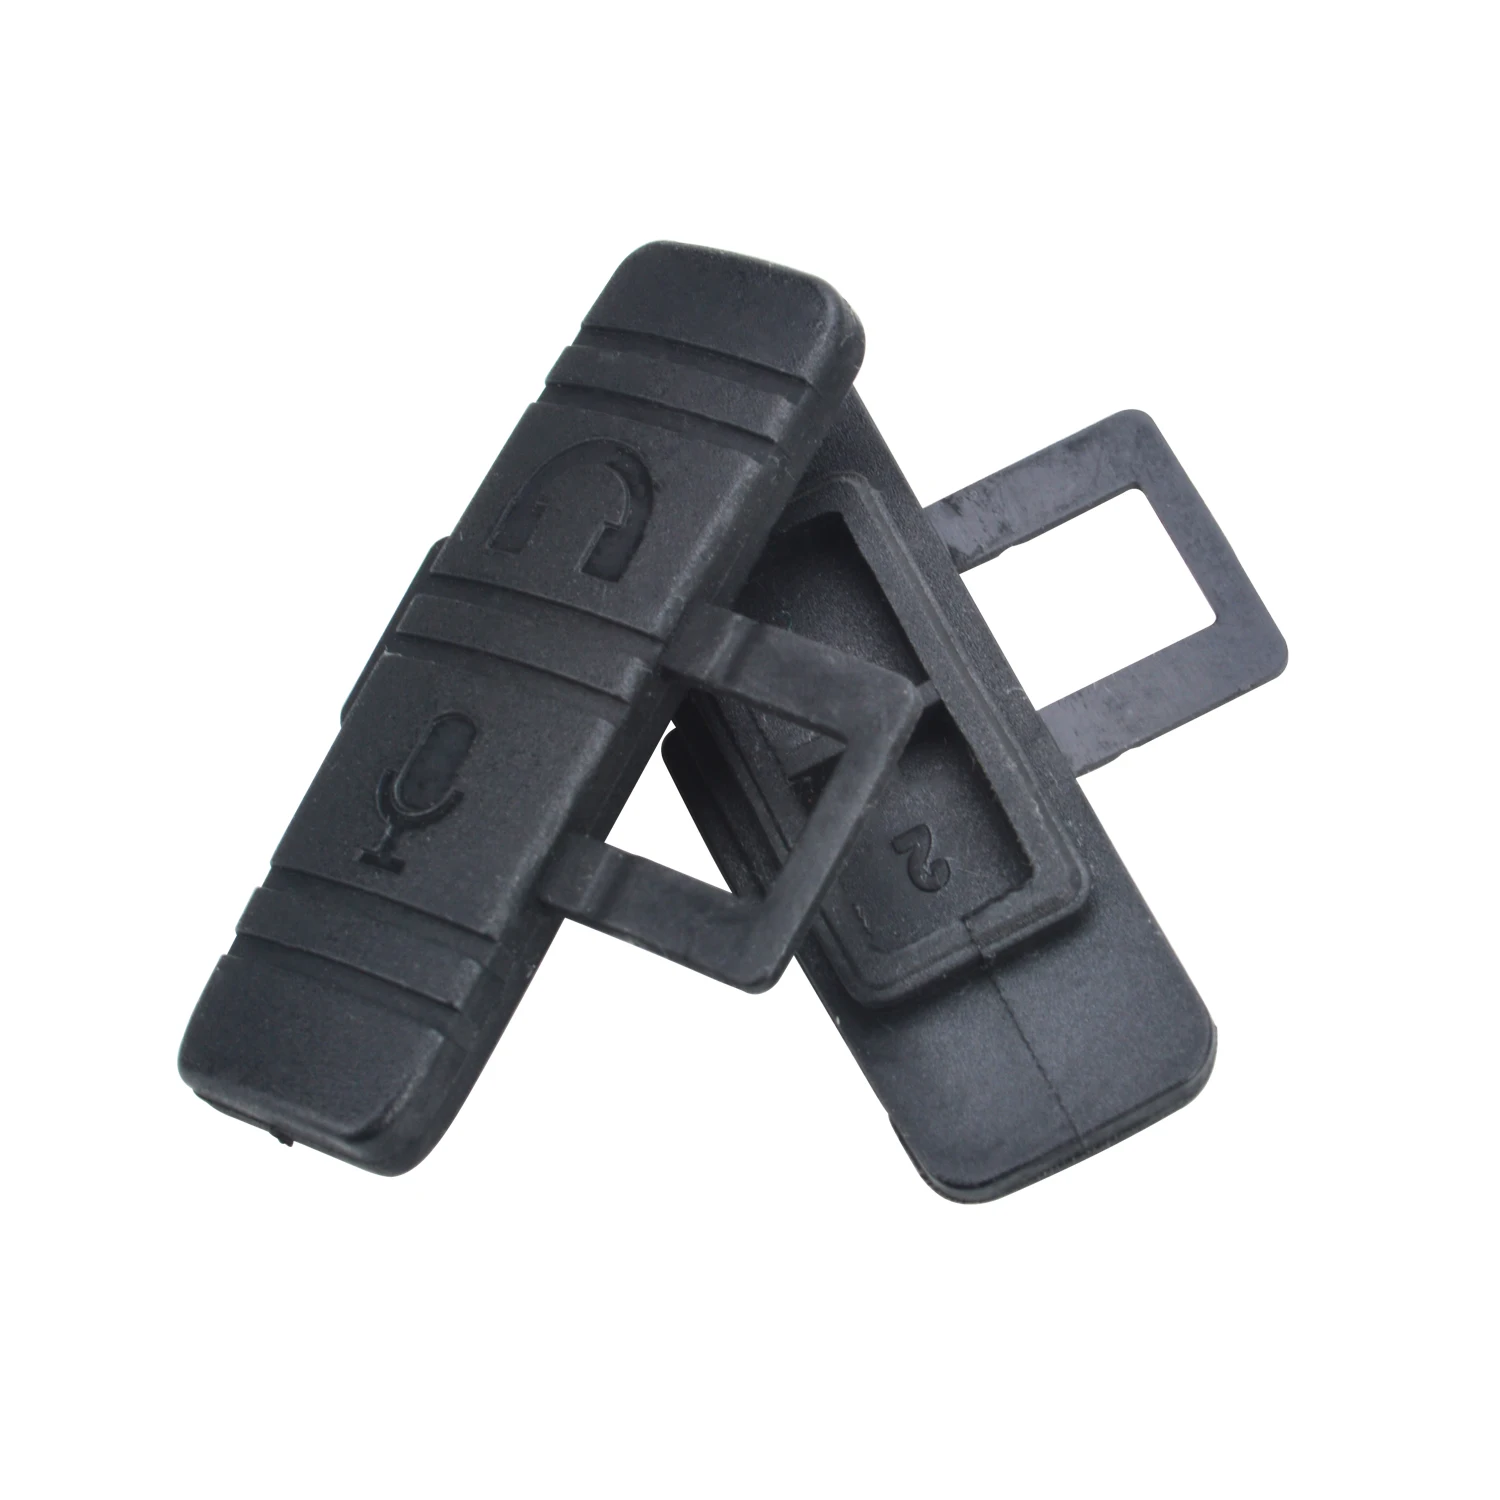 Walkie Talkie Parts Anytone AT-D878UV Plus AT-D878UVII Plus AT-D878S Headphone Microphone Mic Rubber Dust Cover